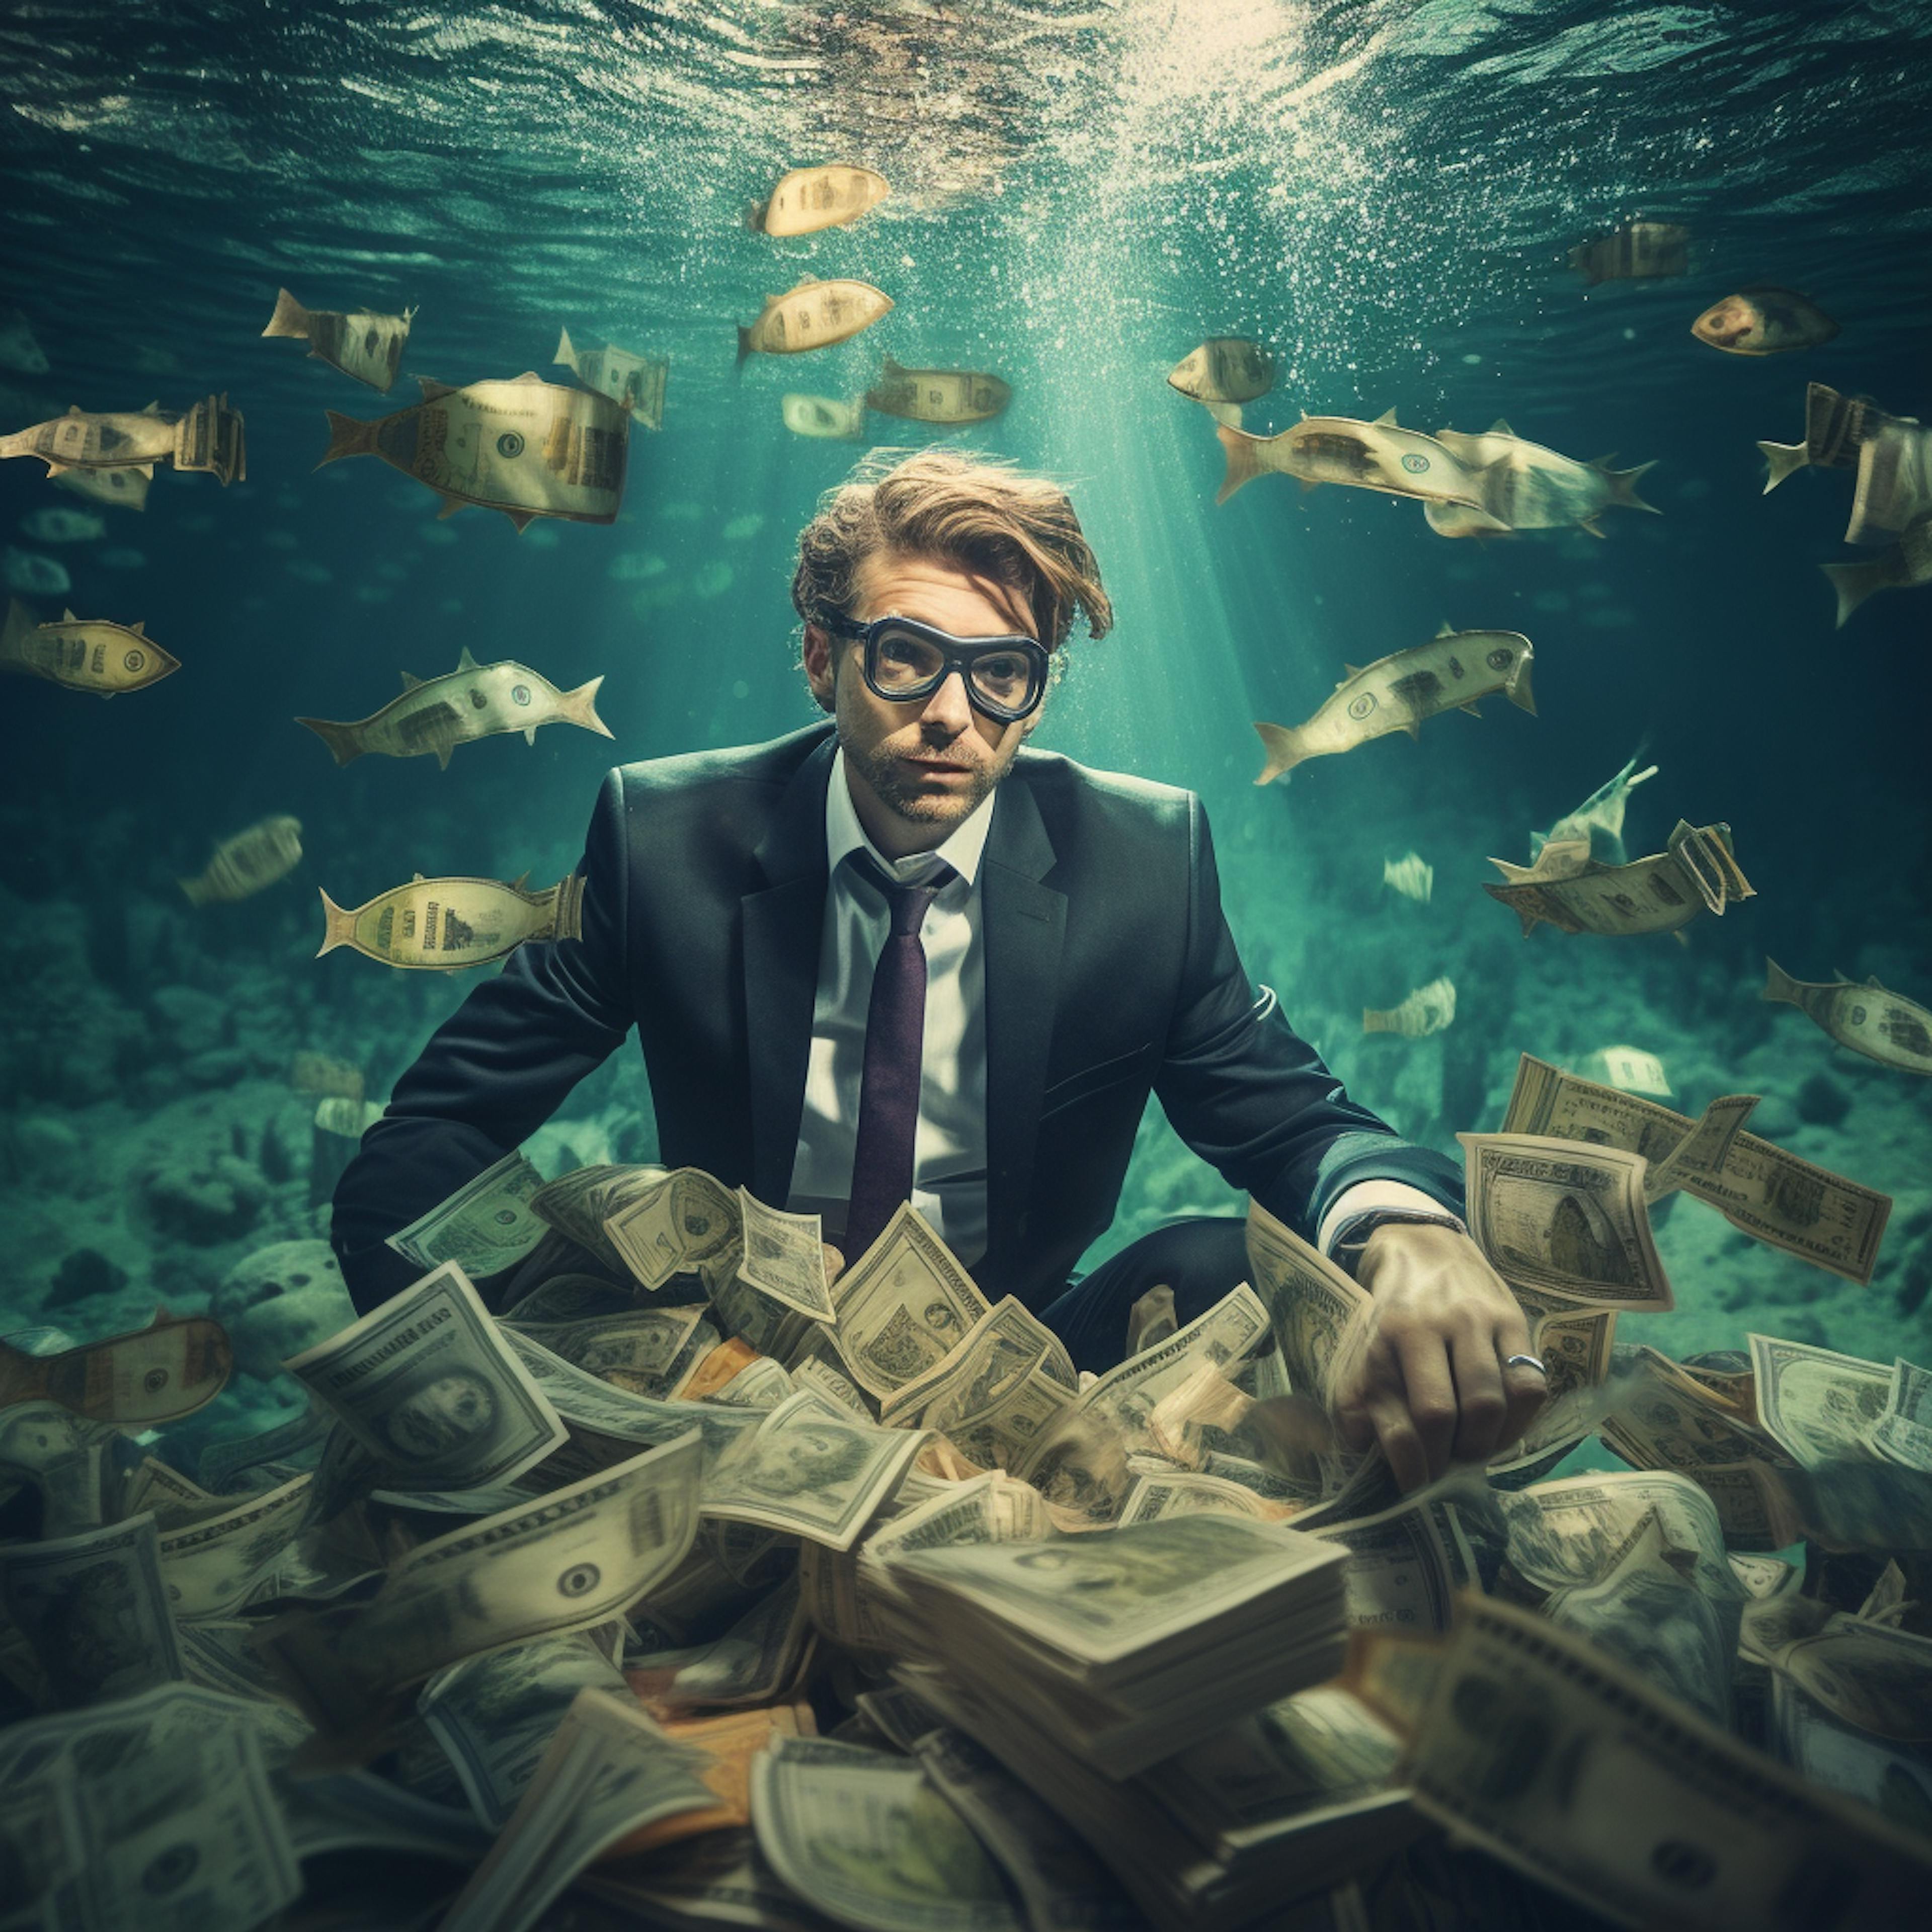 A man in a suit underwater with his money